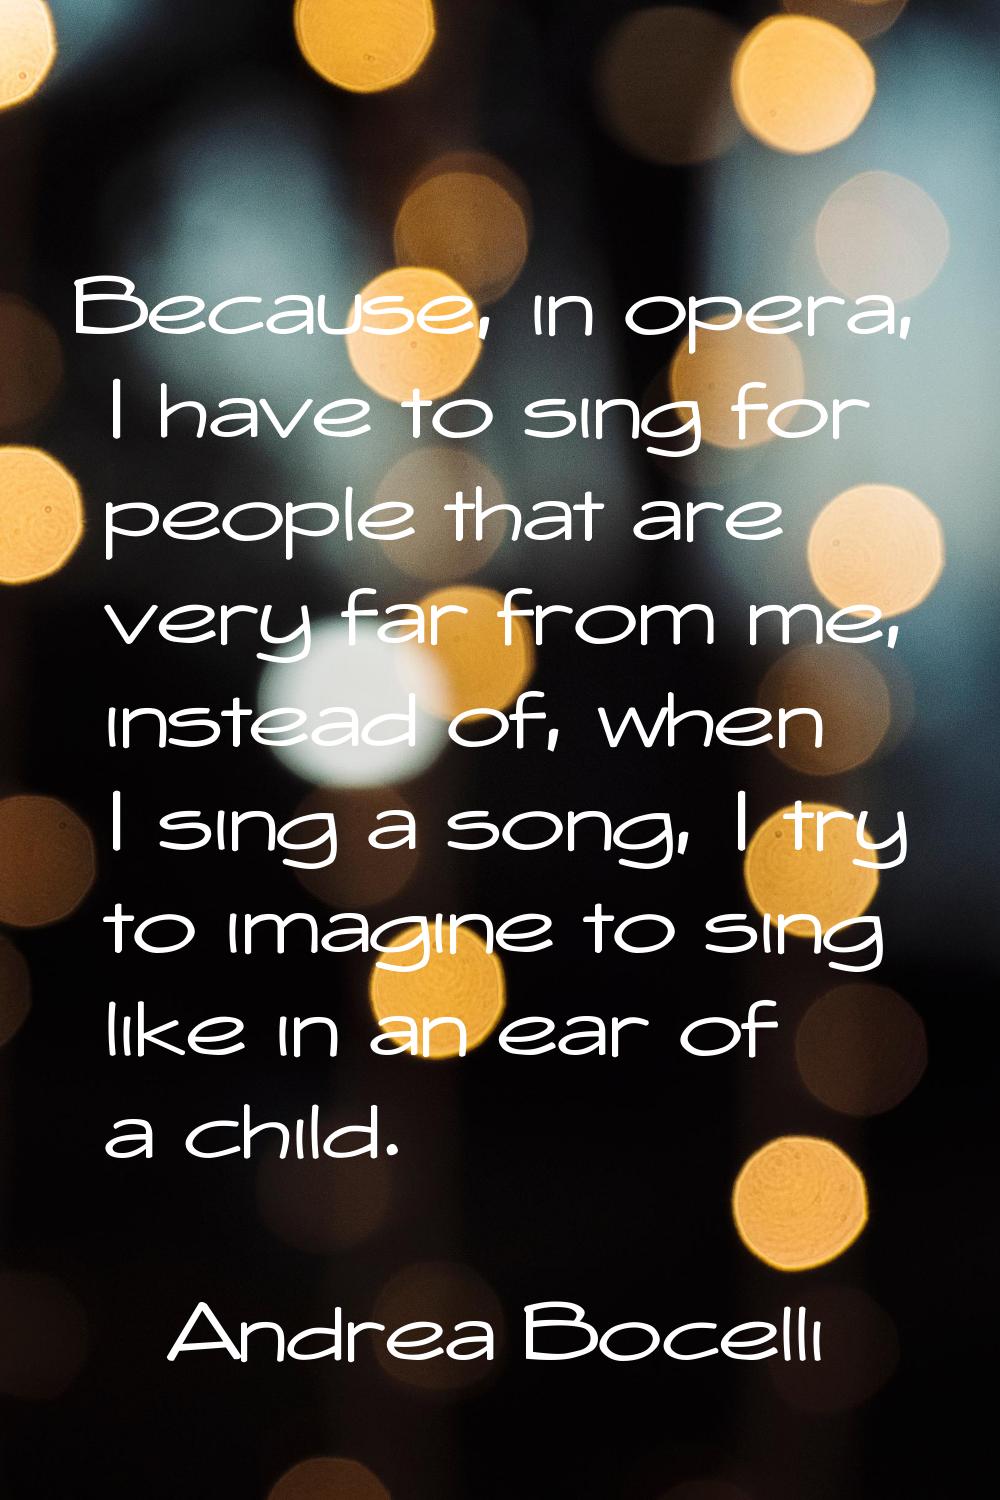 Because, in opera, I have to sing for people that are very far from me, instead of, when I sing a s